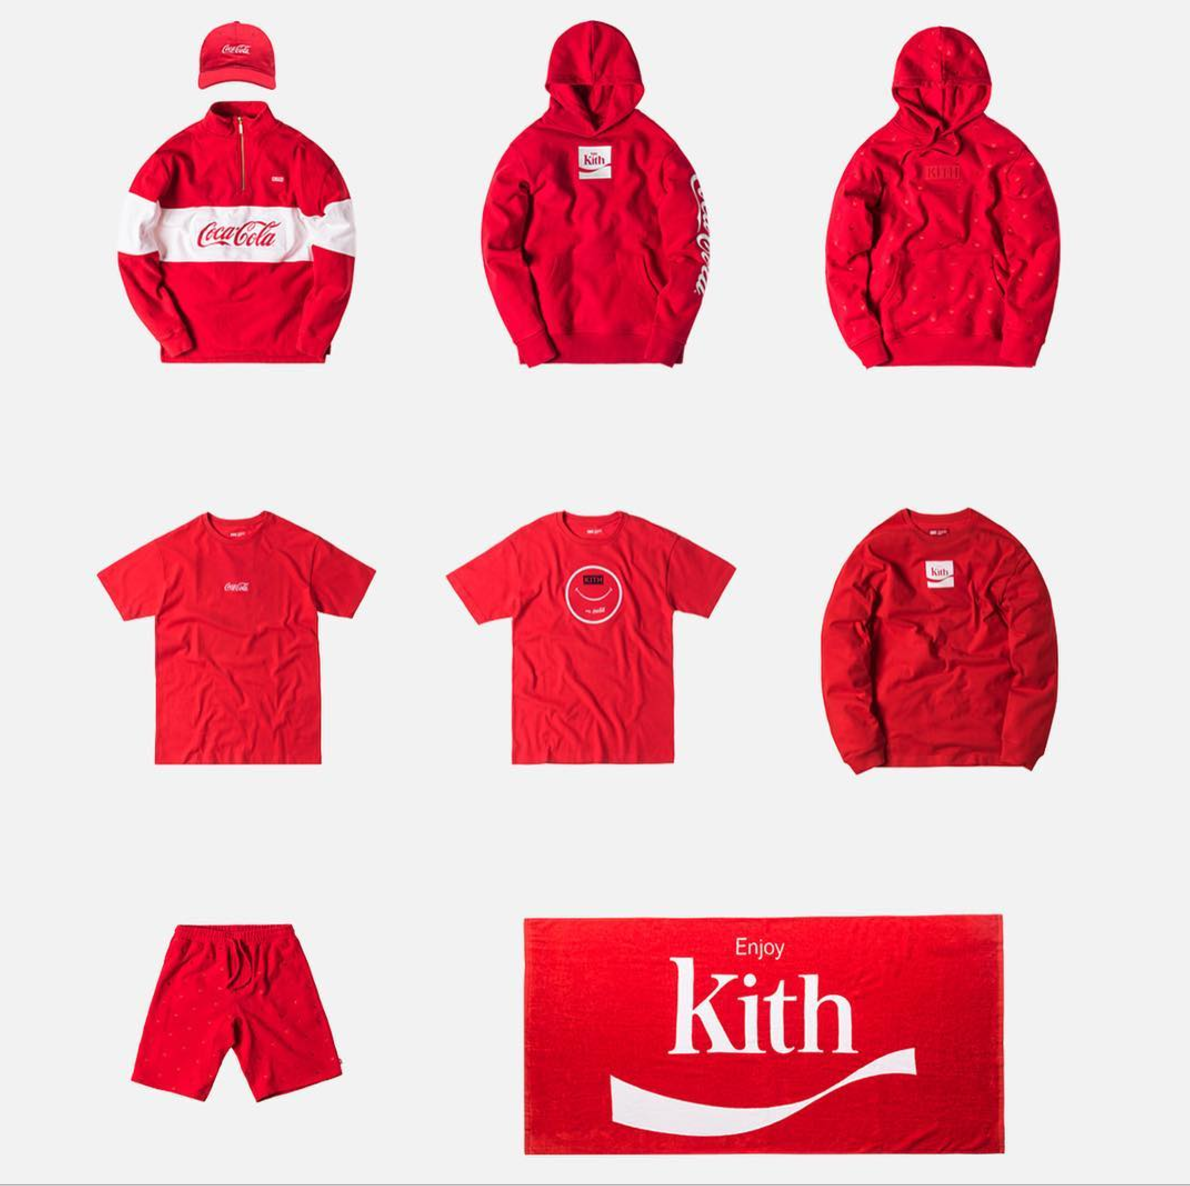 Every Piece From The Kith x Coca Cola Collaboration